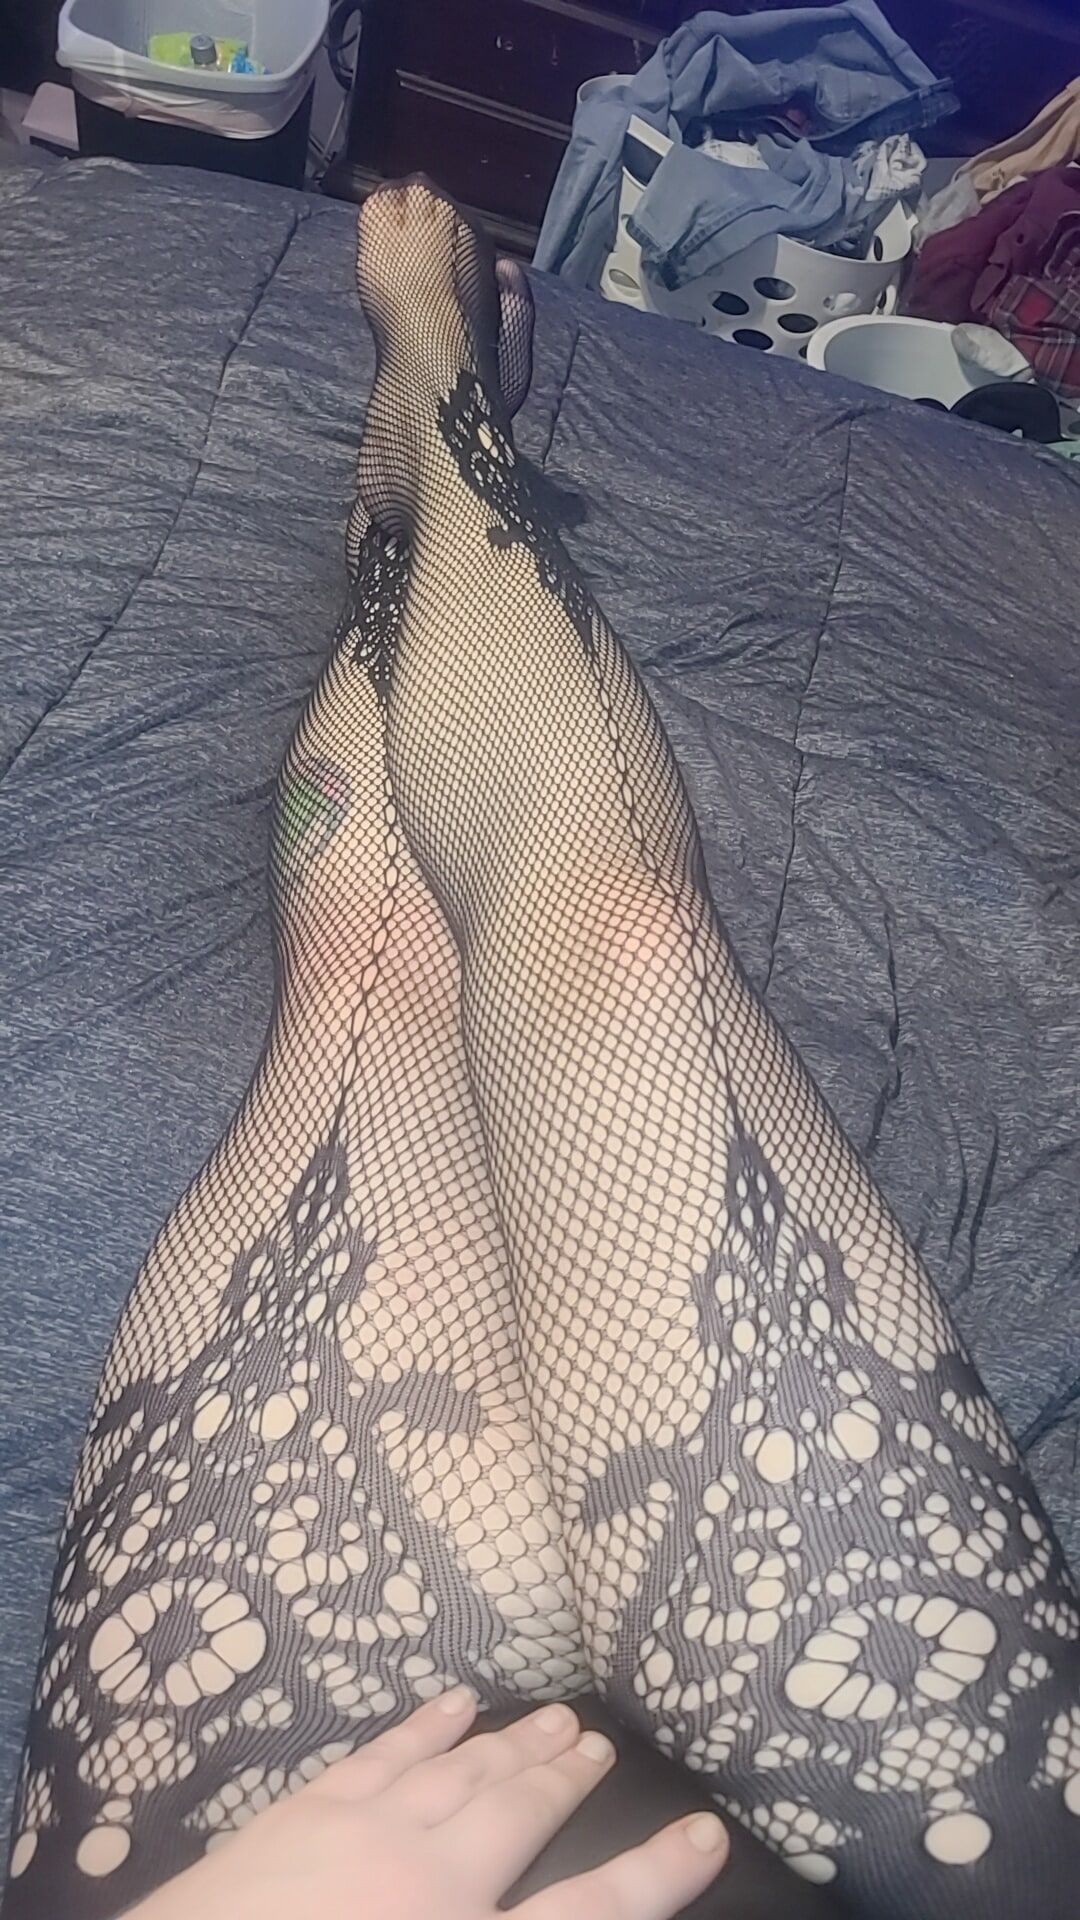 Bbw playing in sexy blue lingerie and fishnets